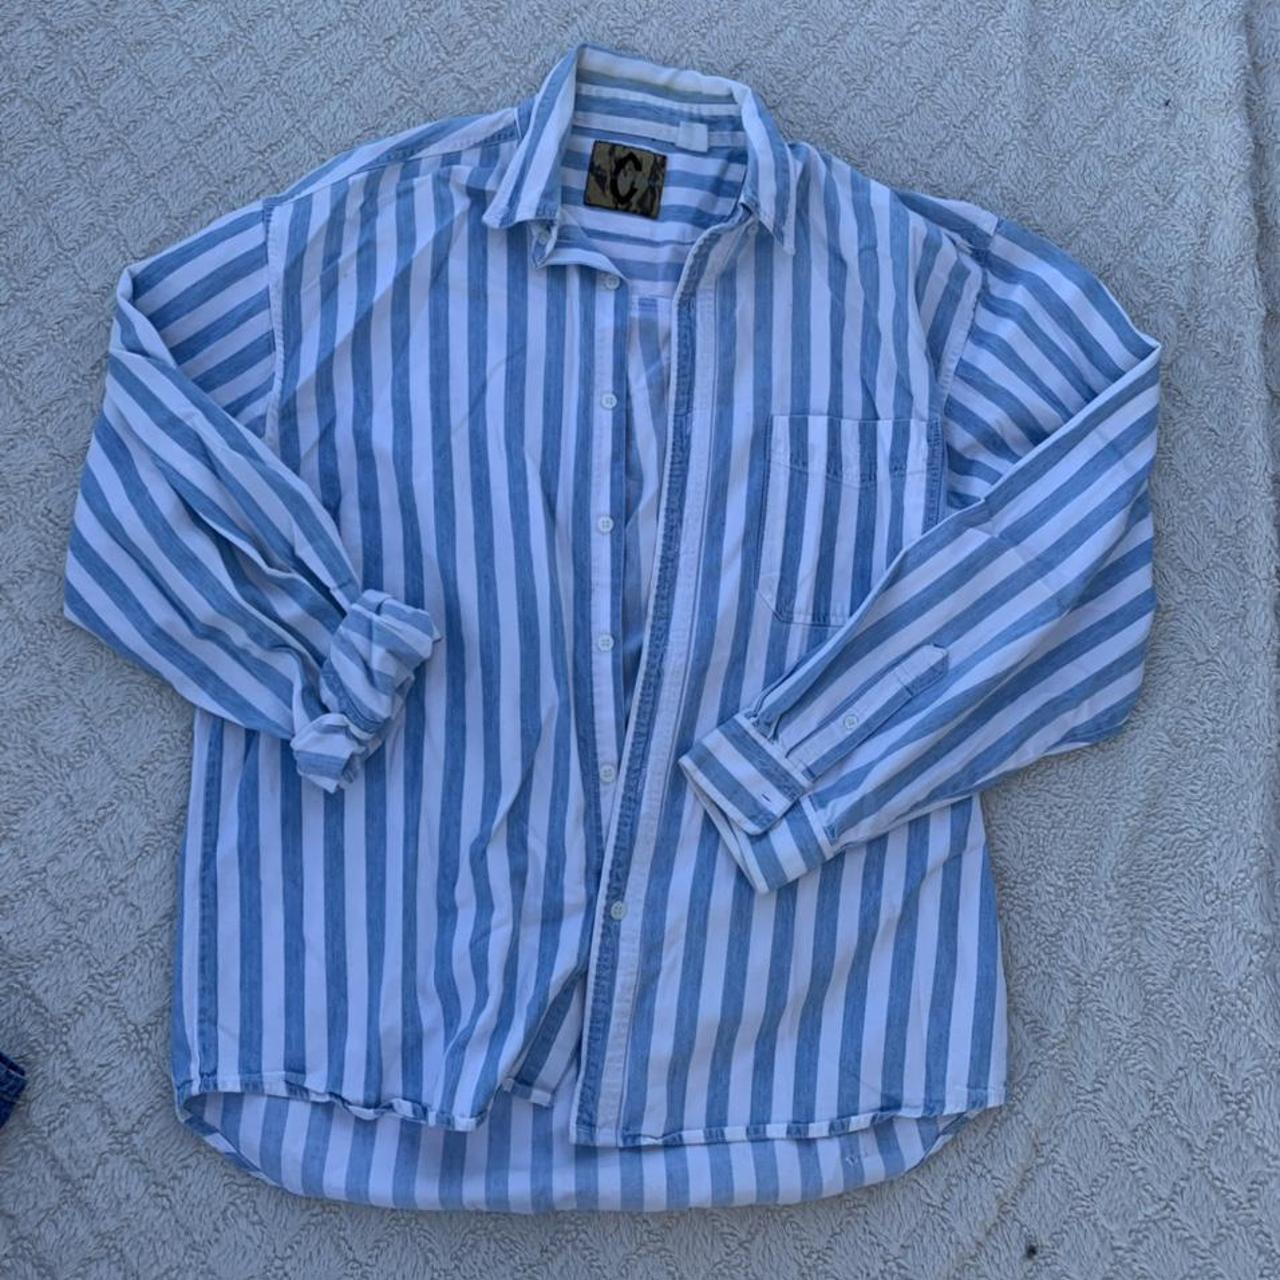 Product Image 1 - 90’s vintage striped top in